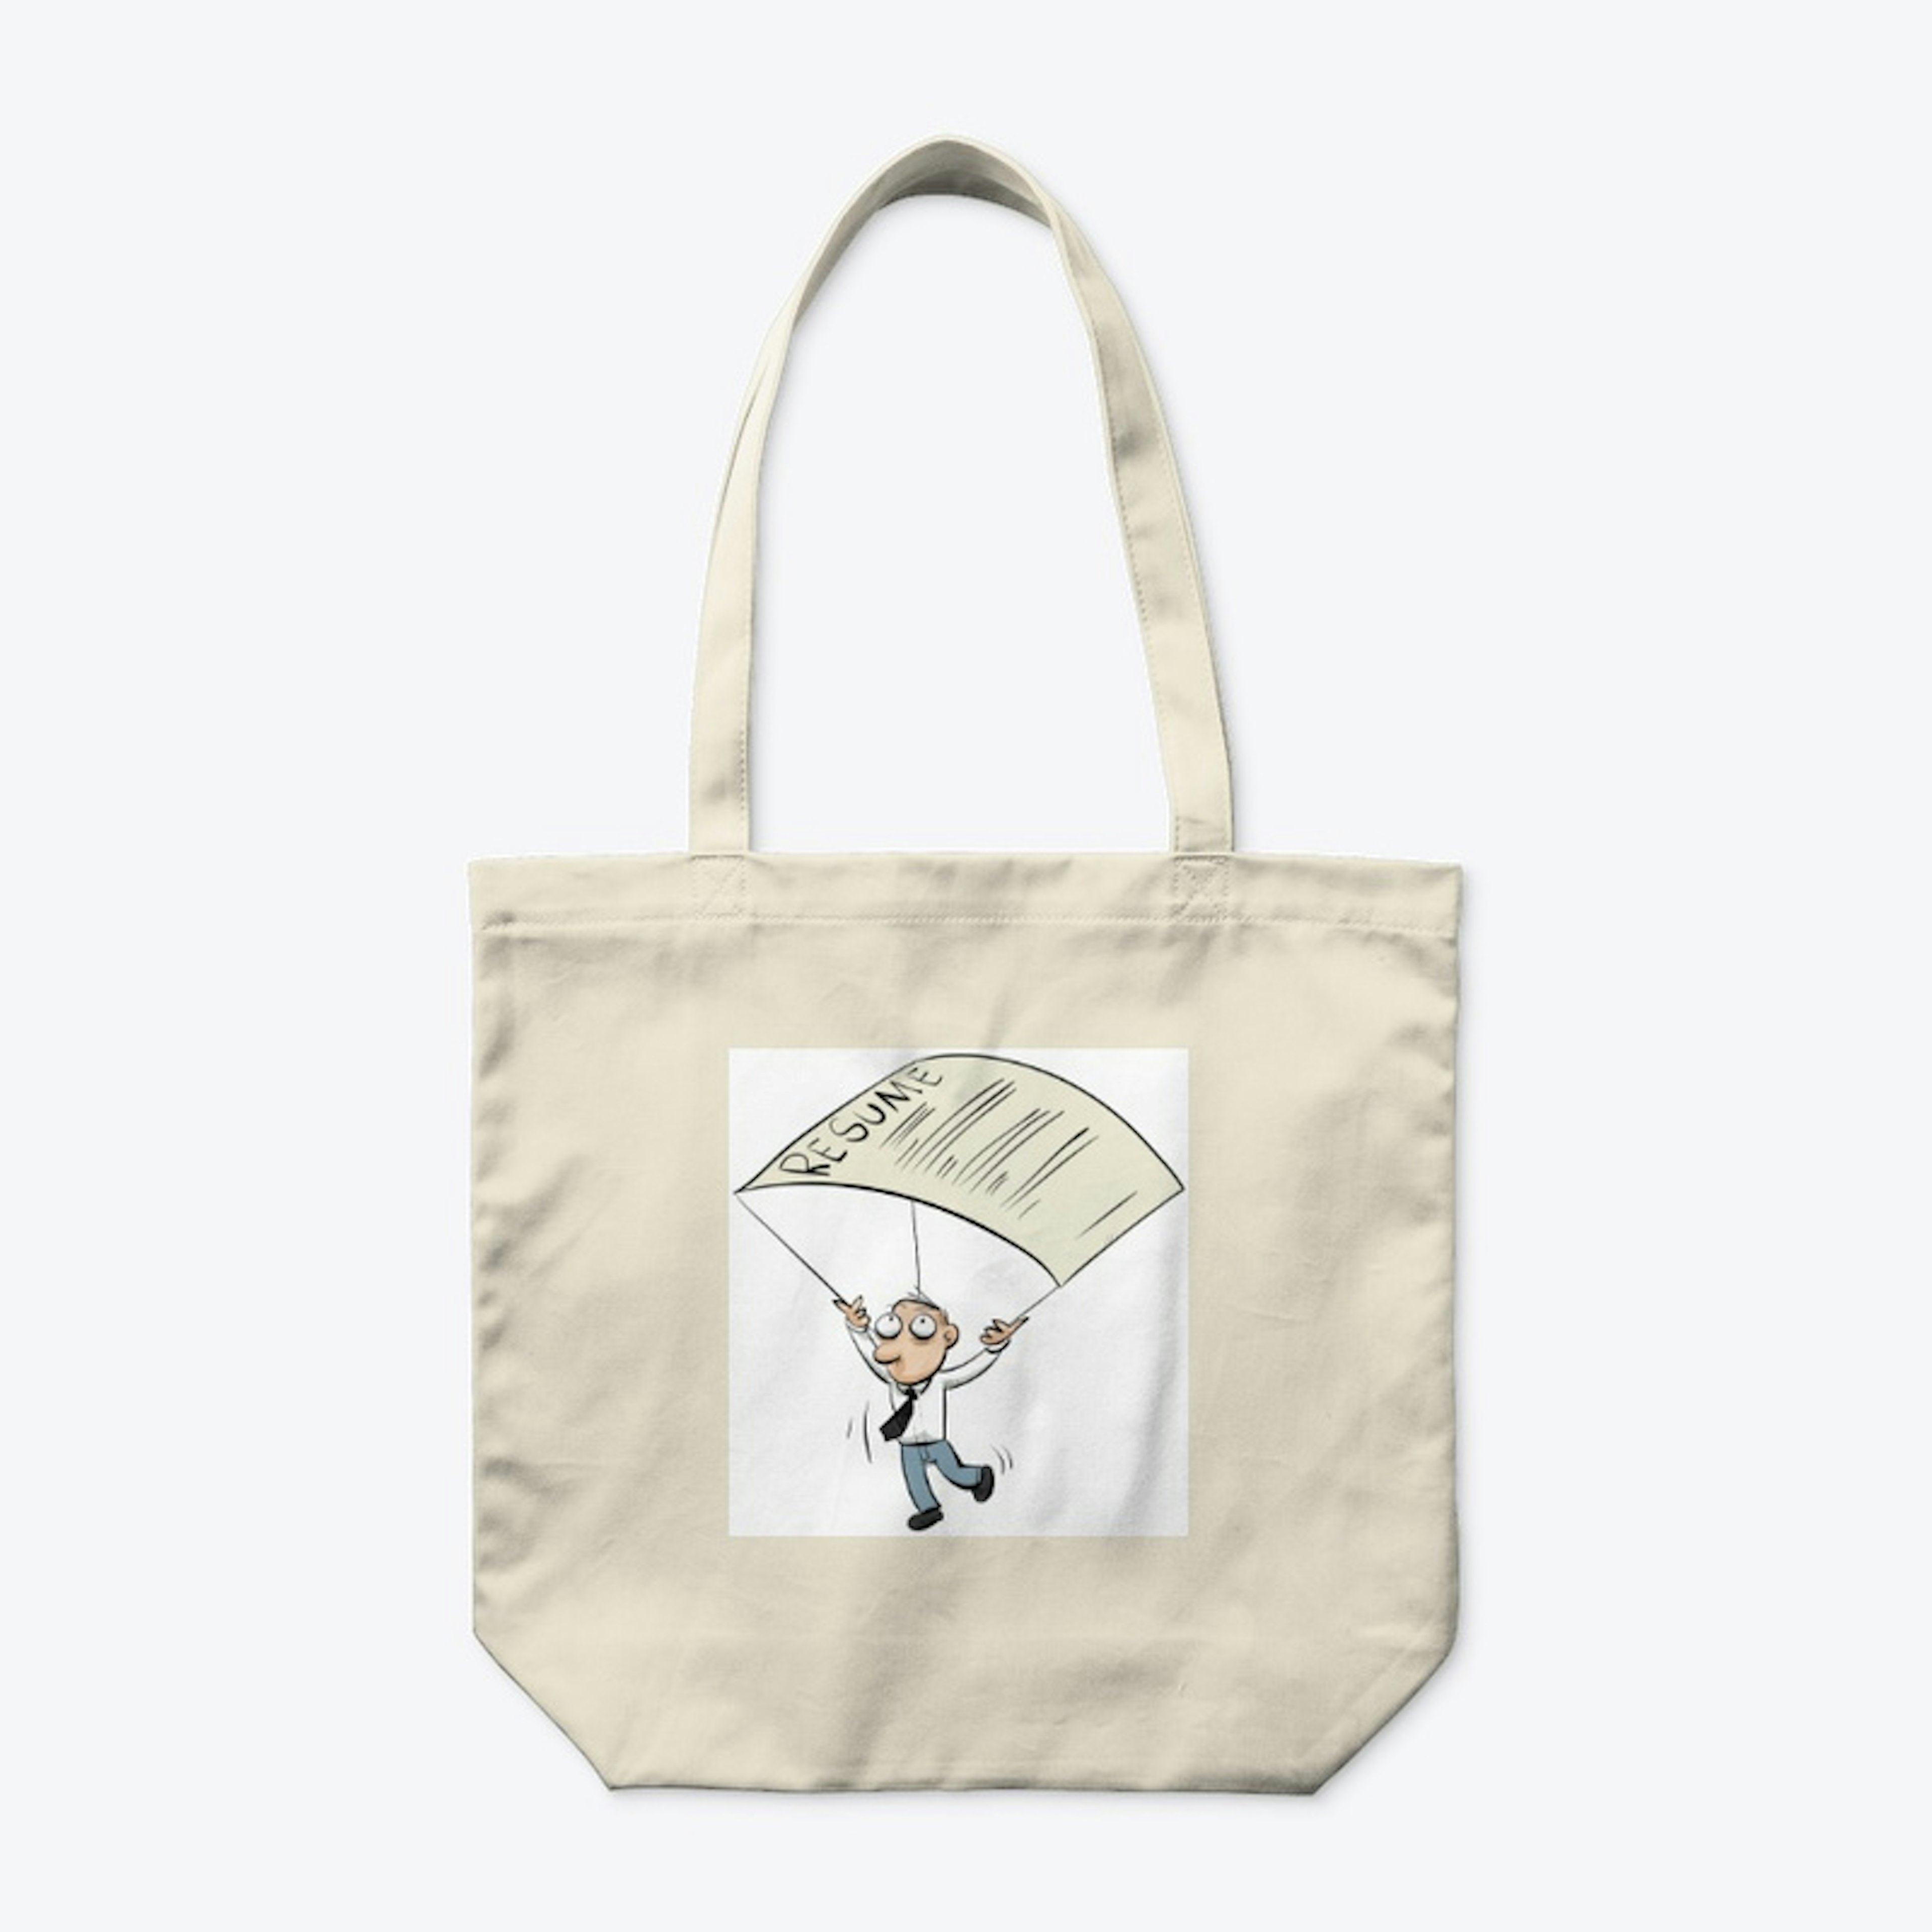 Olympic Resume Organic Tote! Excelsior! 